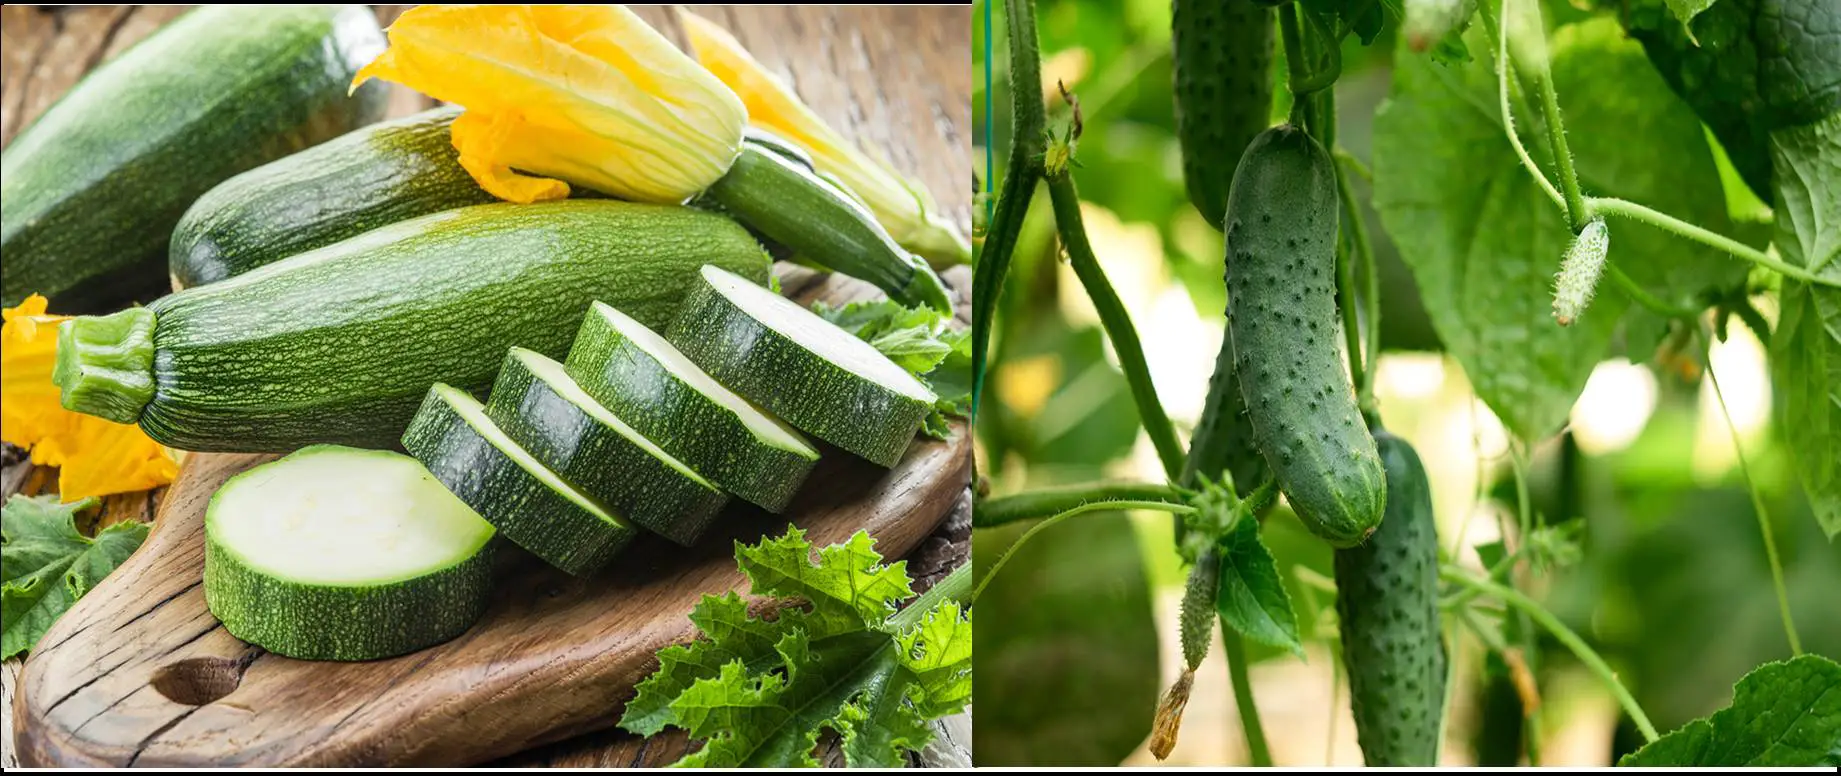 Zucchini VS Cucumber : What Makes Them Different?